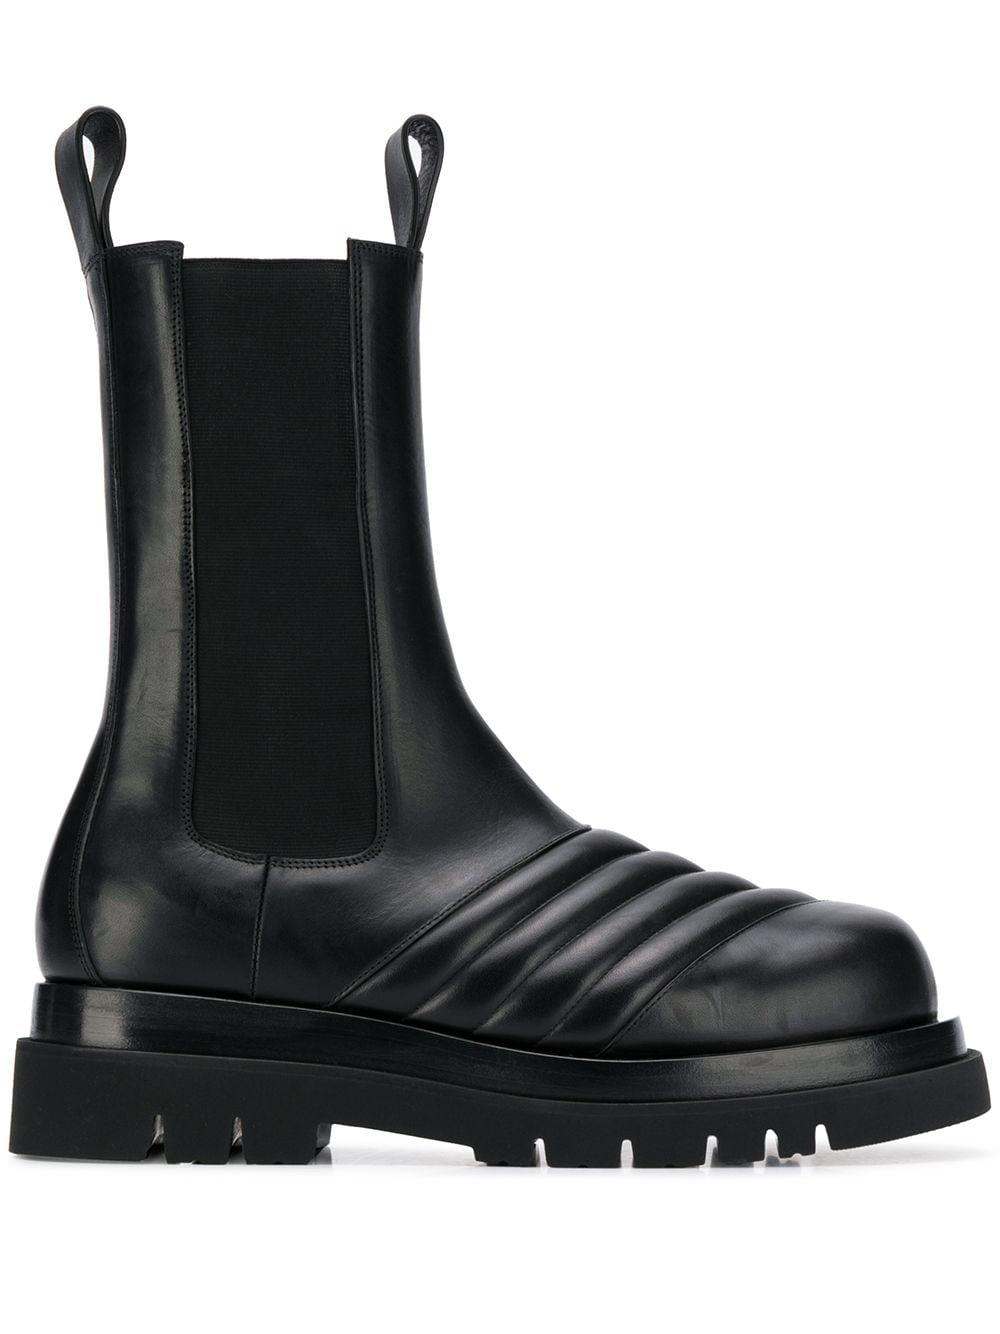 Bottega Veneta Leather Quilted Mid-calf Boots in Black for Men - Lyst